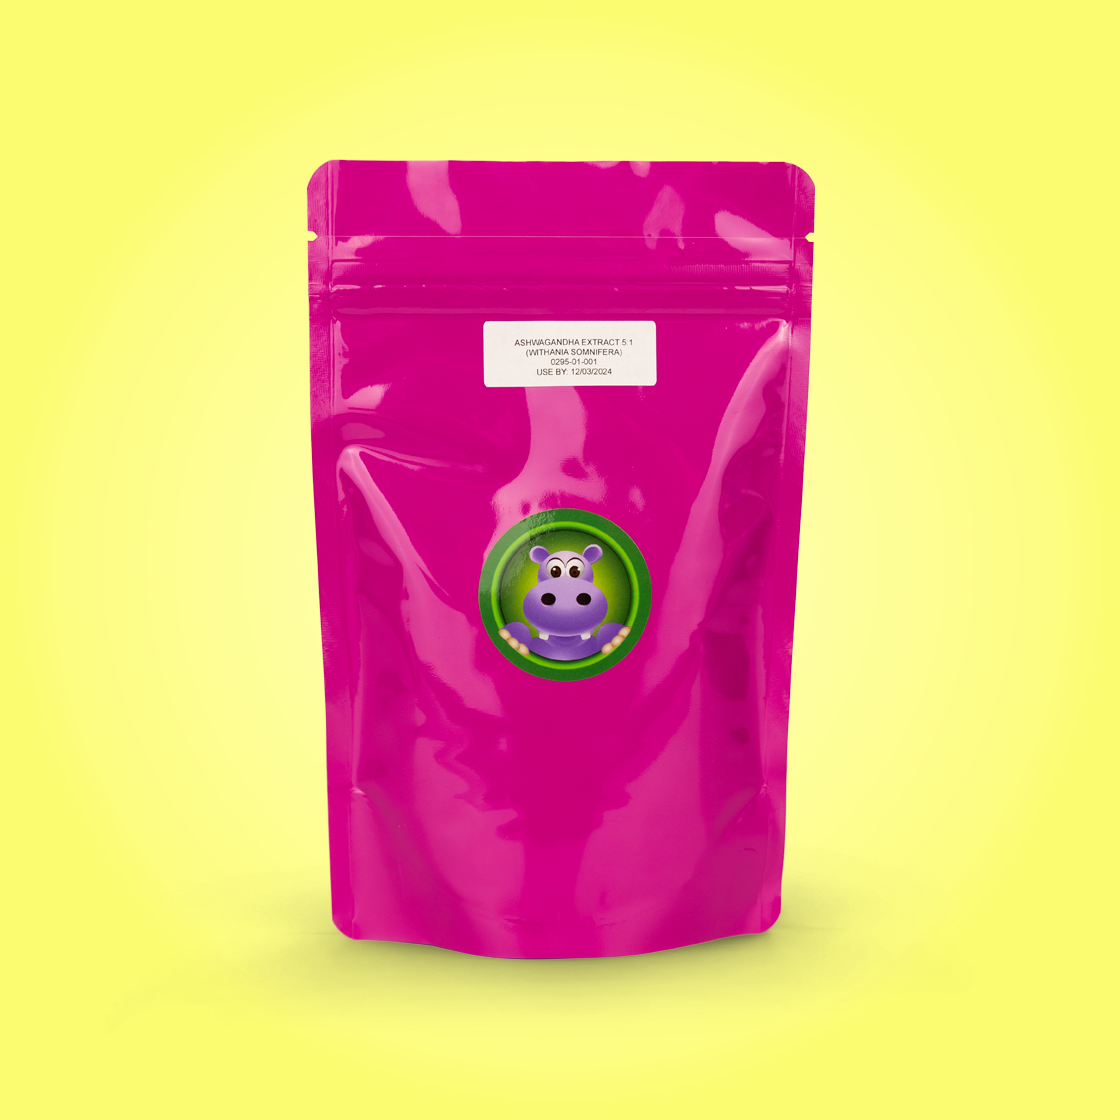 Featured image depicting a pink packet of Ashwagandha root powder (Withania Somnfera).